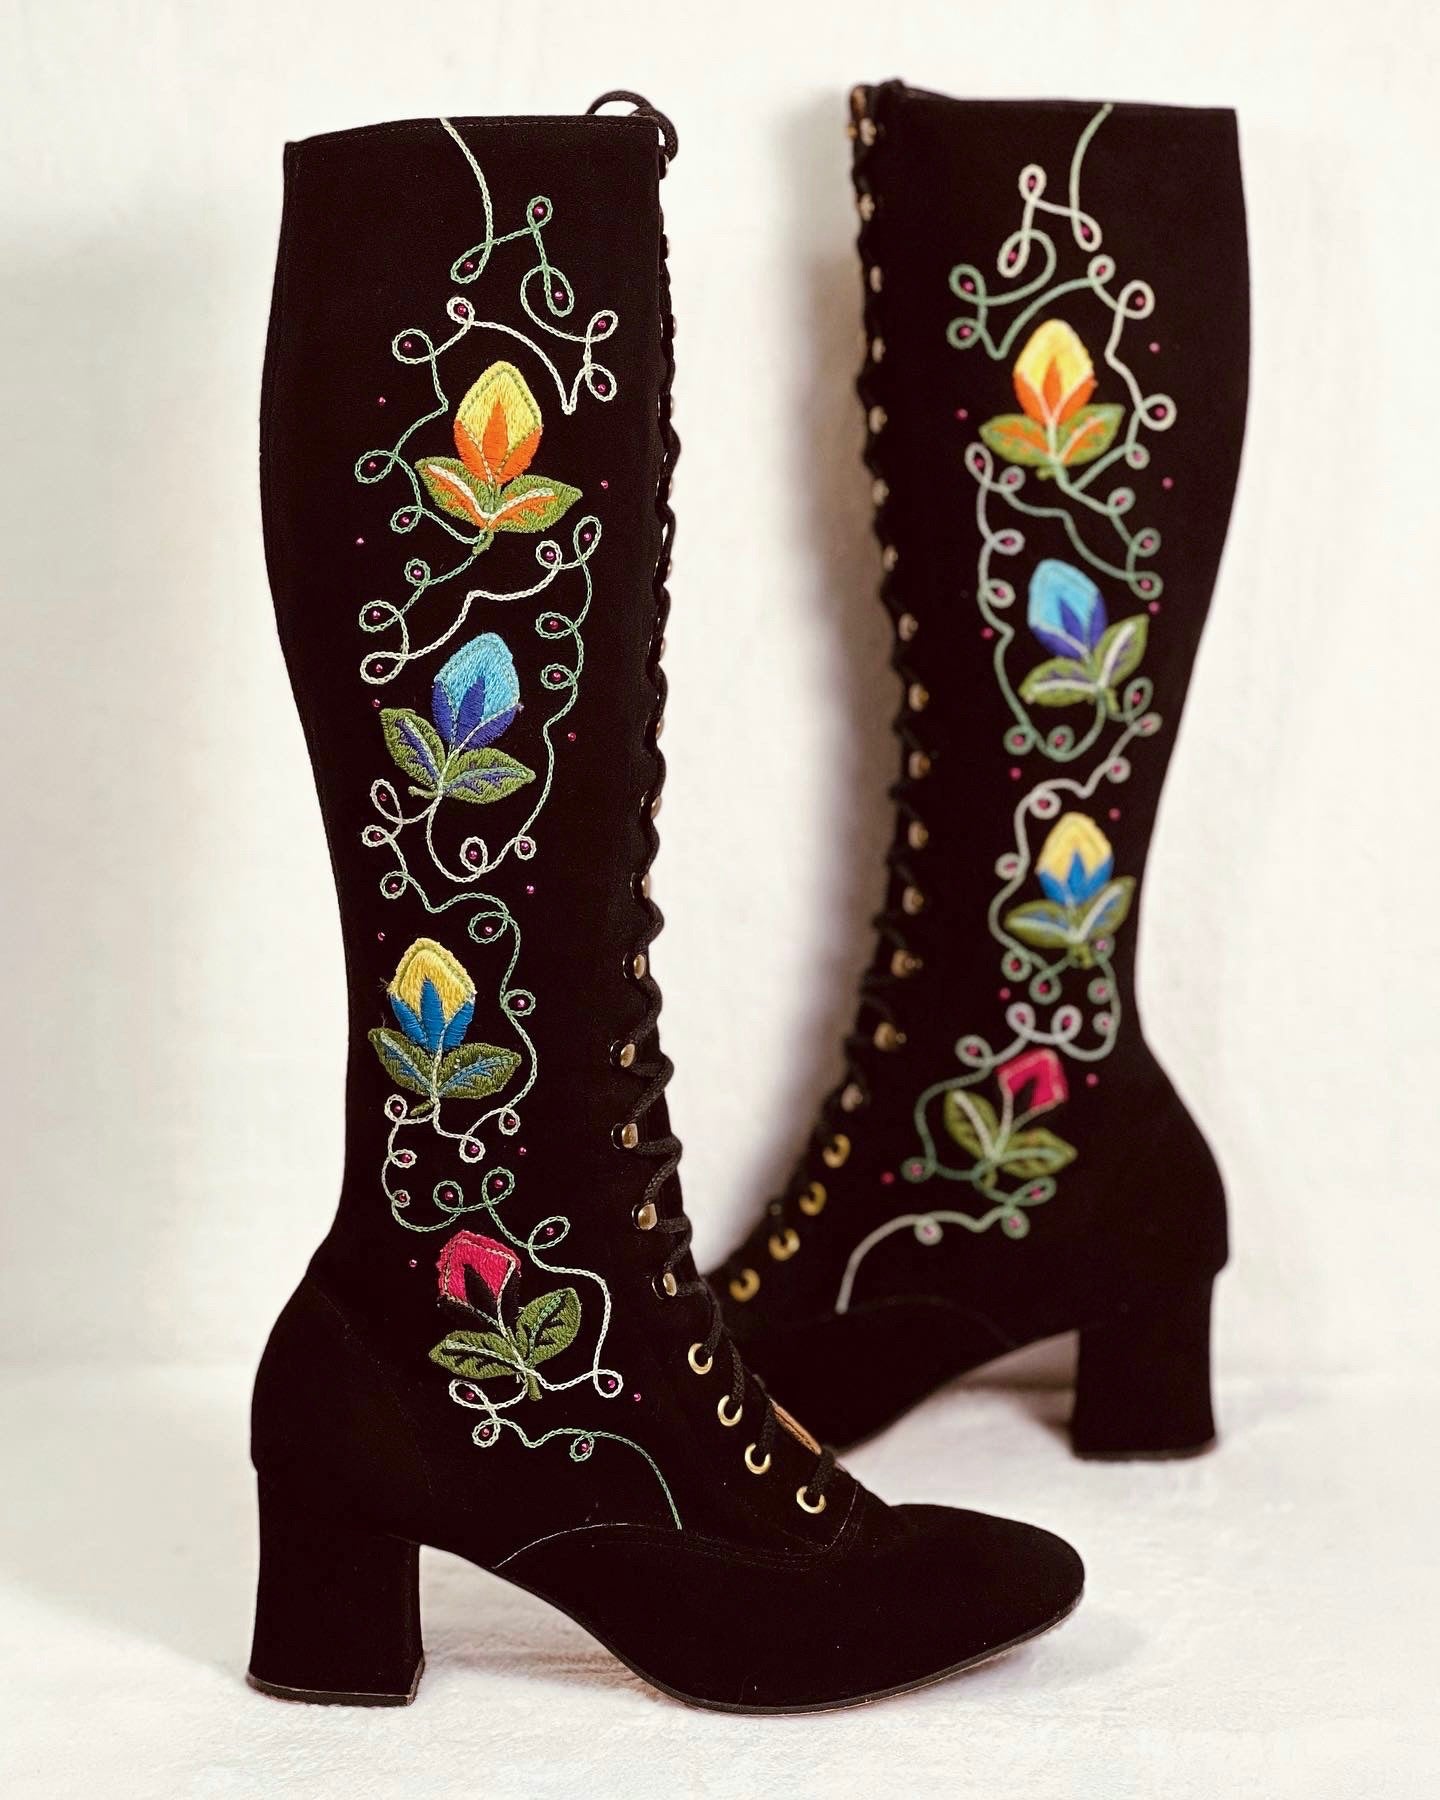 1960s go go boots